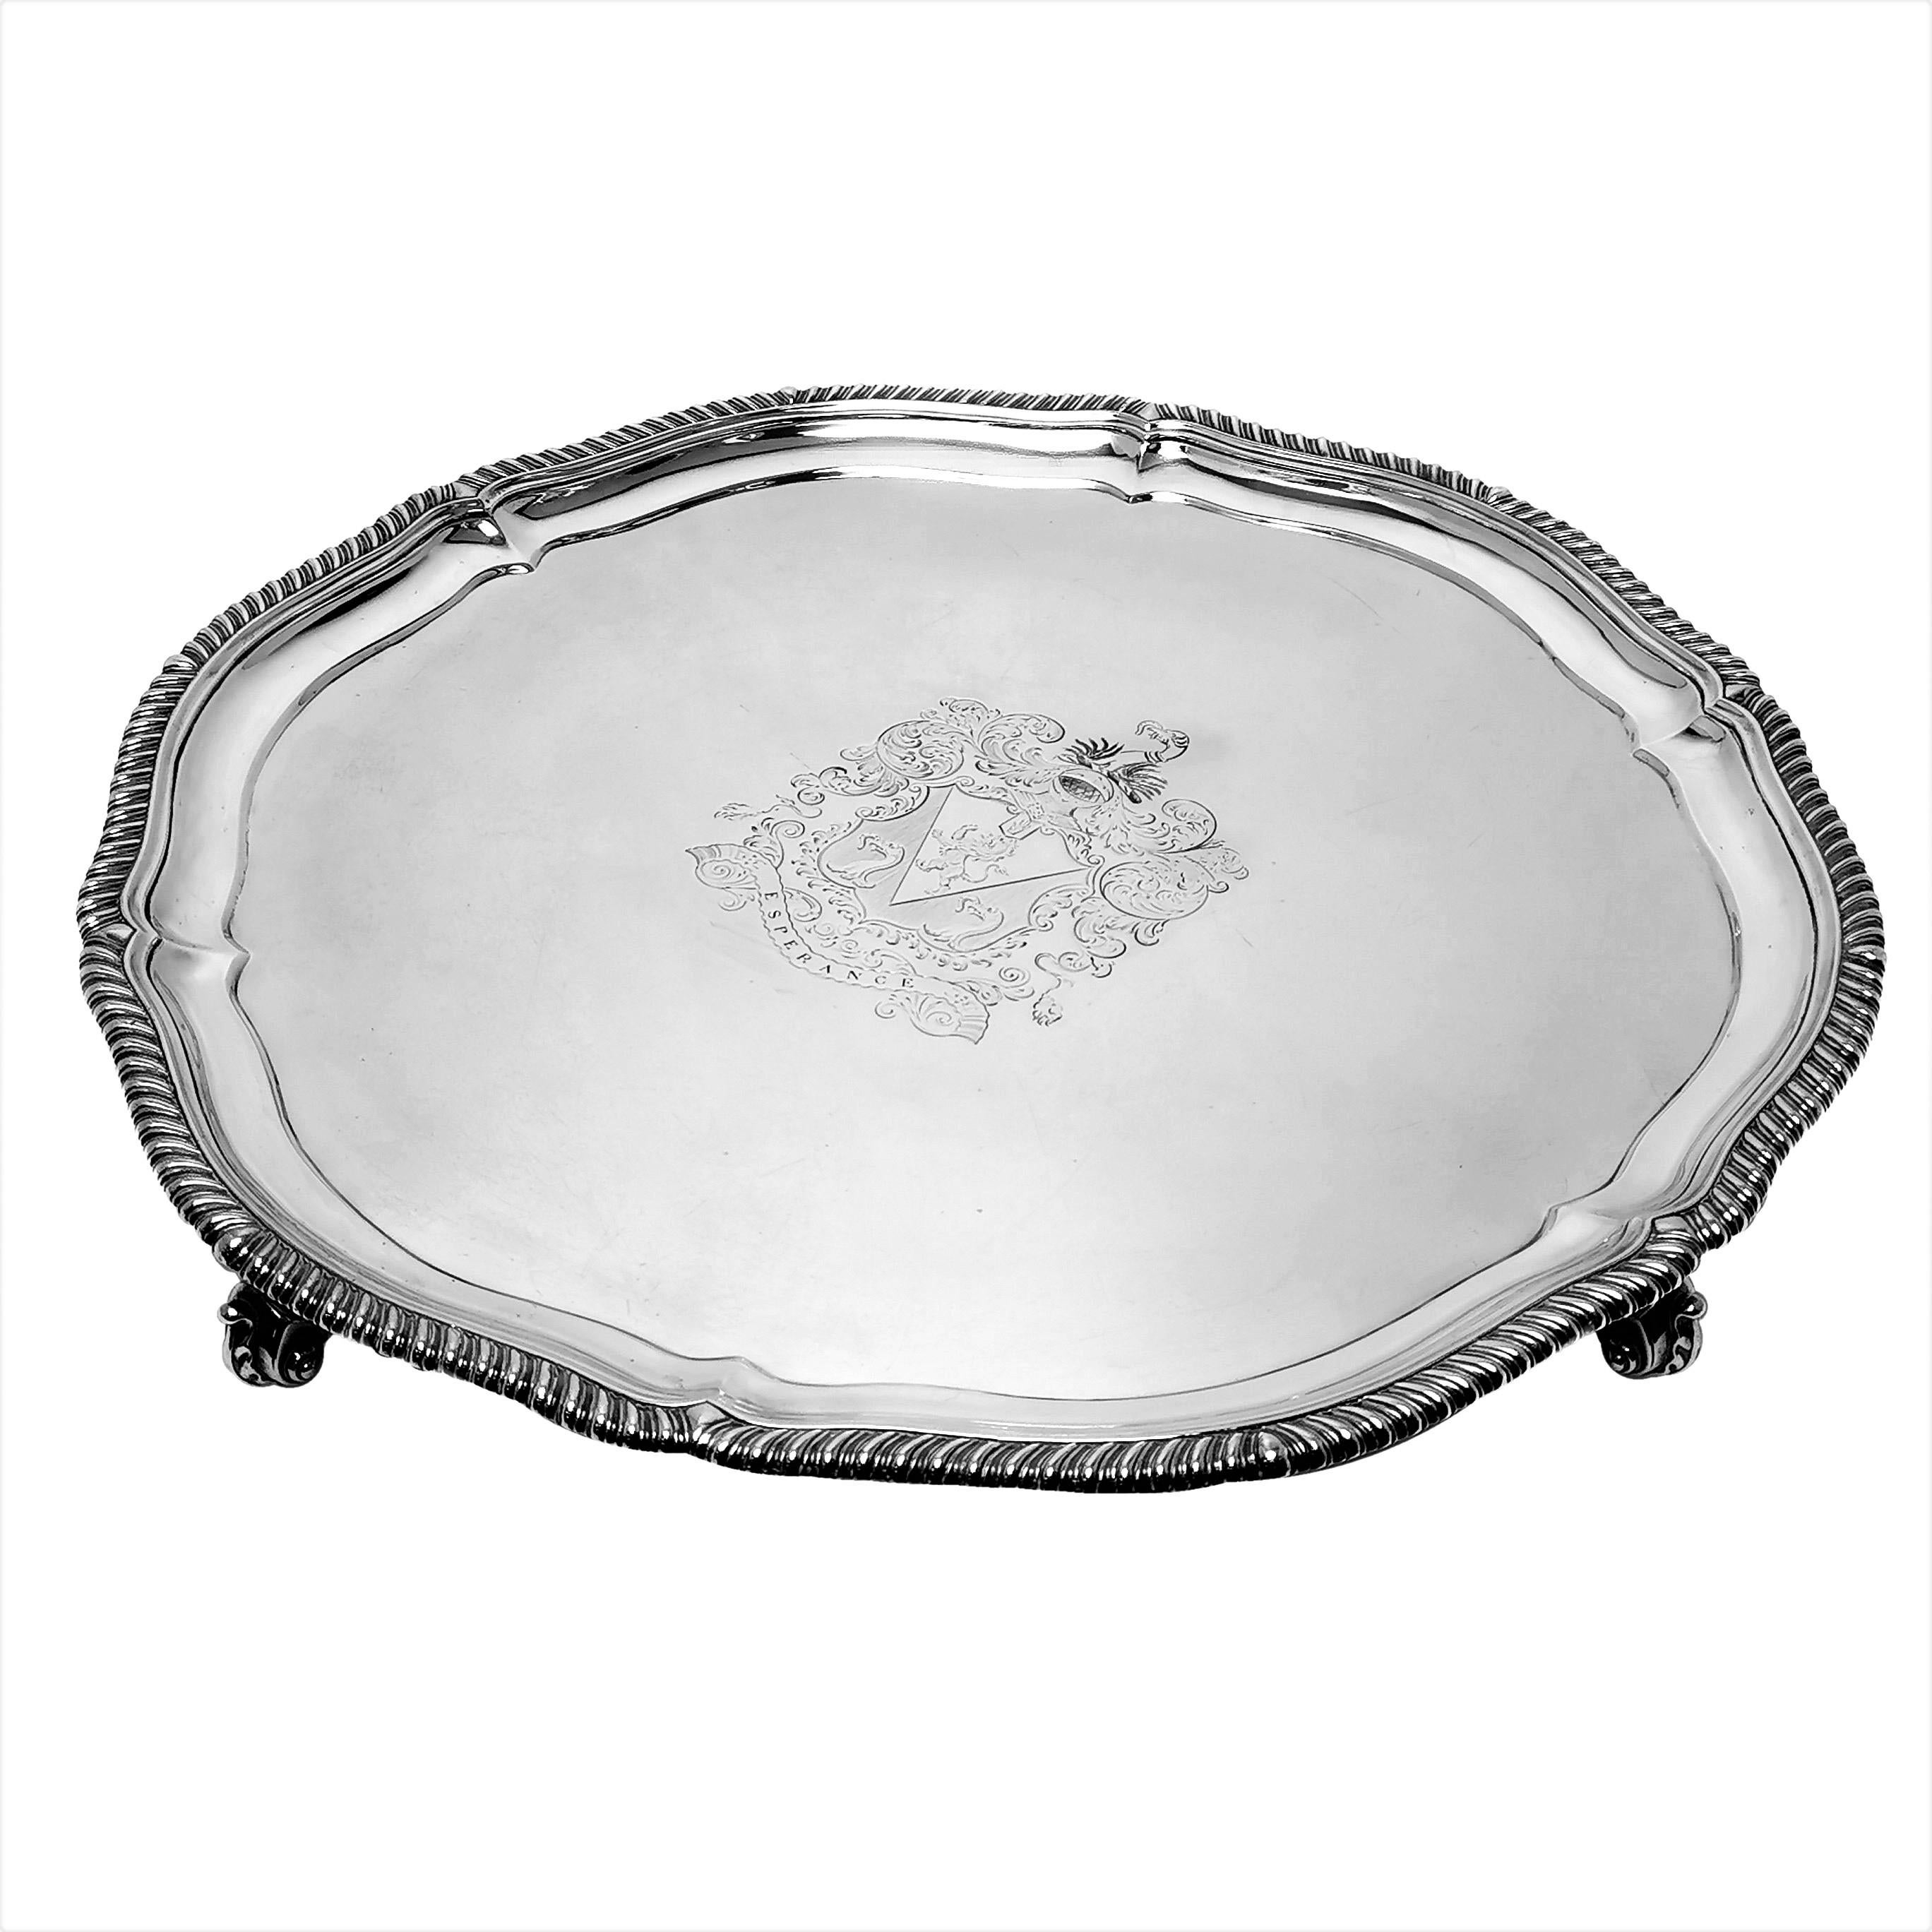 An impressive Antique Victorian Silver Salver with a classic gadroon pattern border. This oversized Salver has a large engraved crest in the centre. This salver is of notably large size and good weight.

Made in London, England in 1874 by